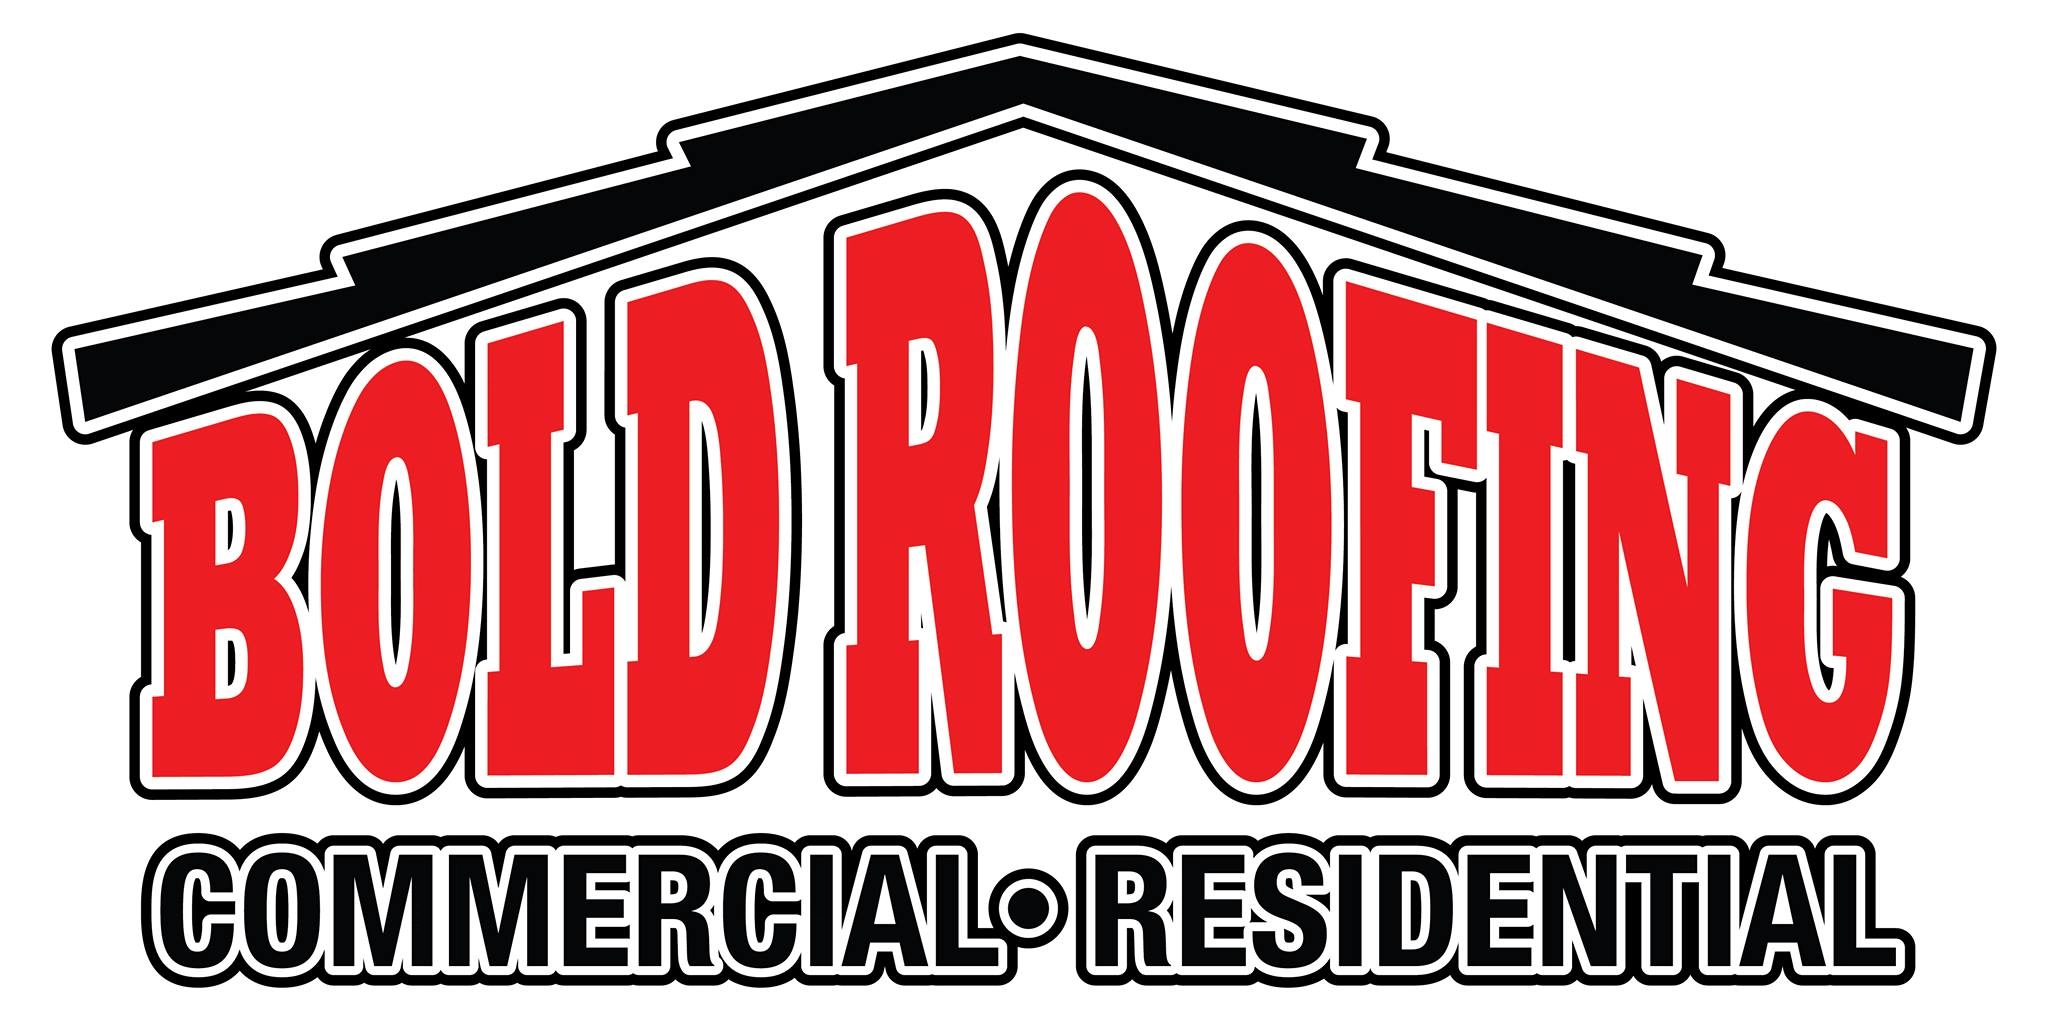 Bold Roofing Logo